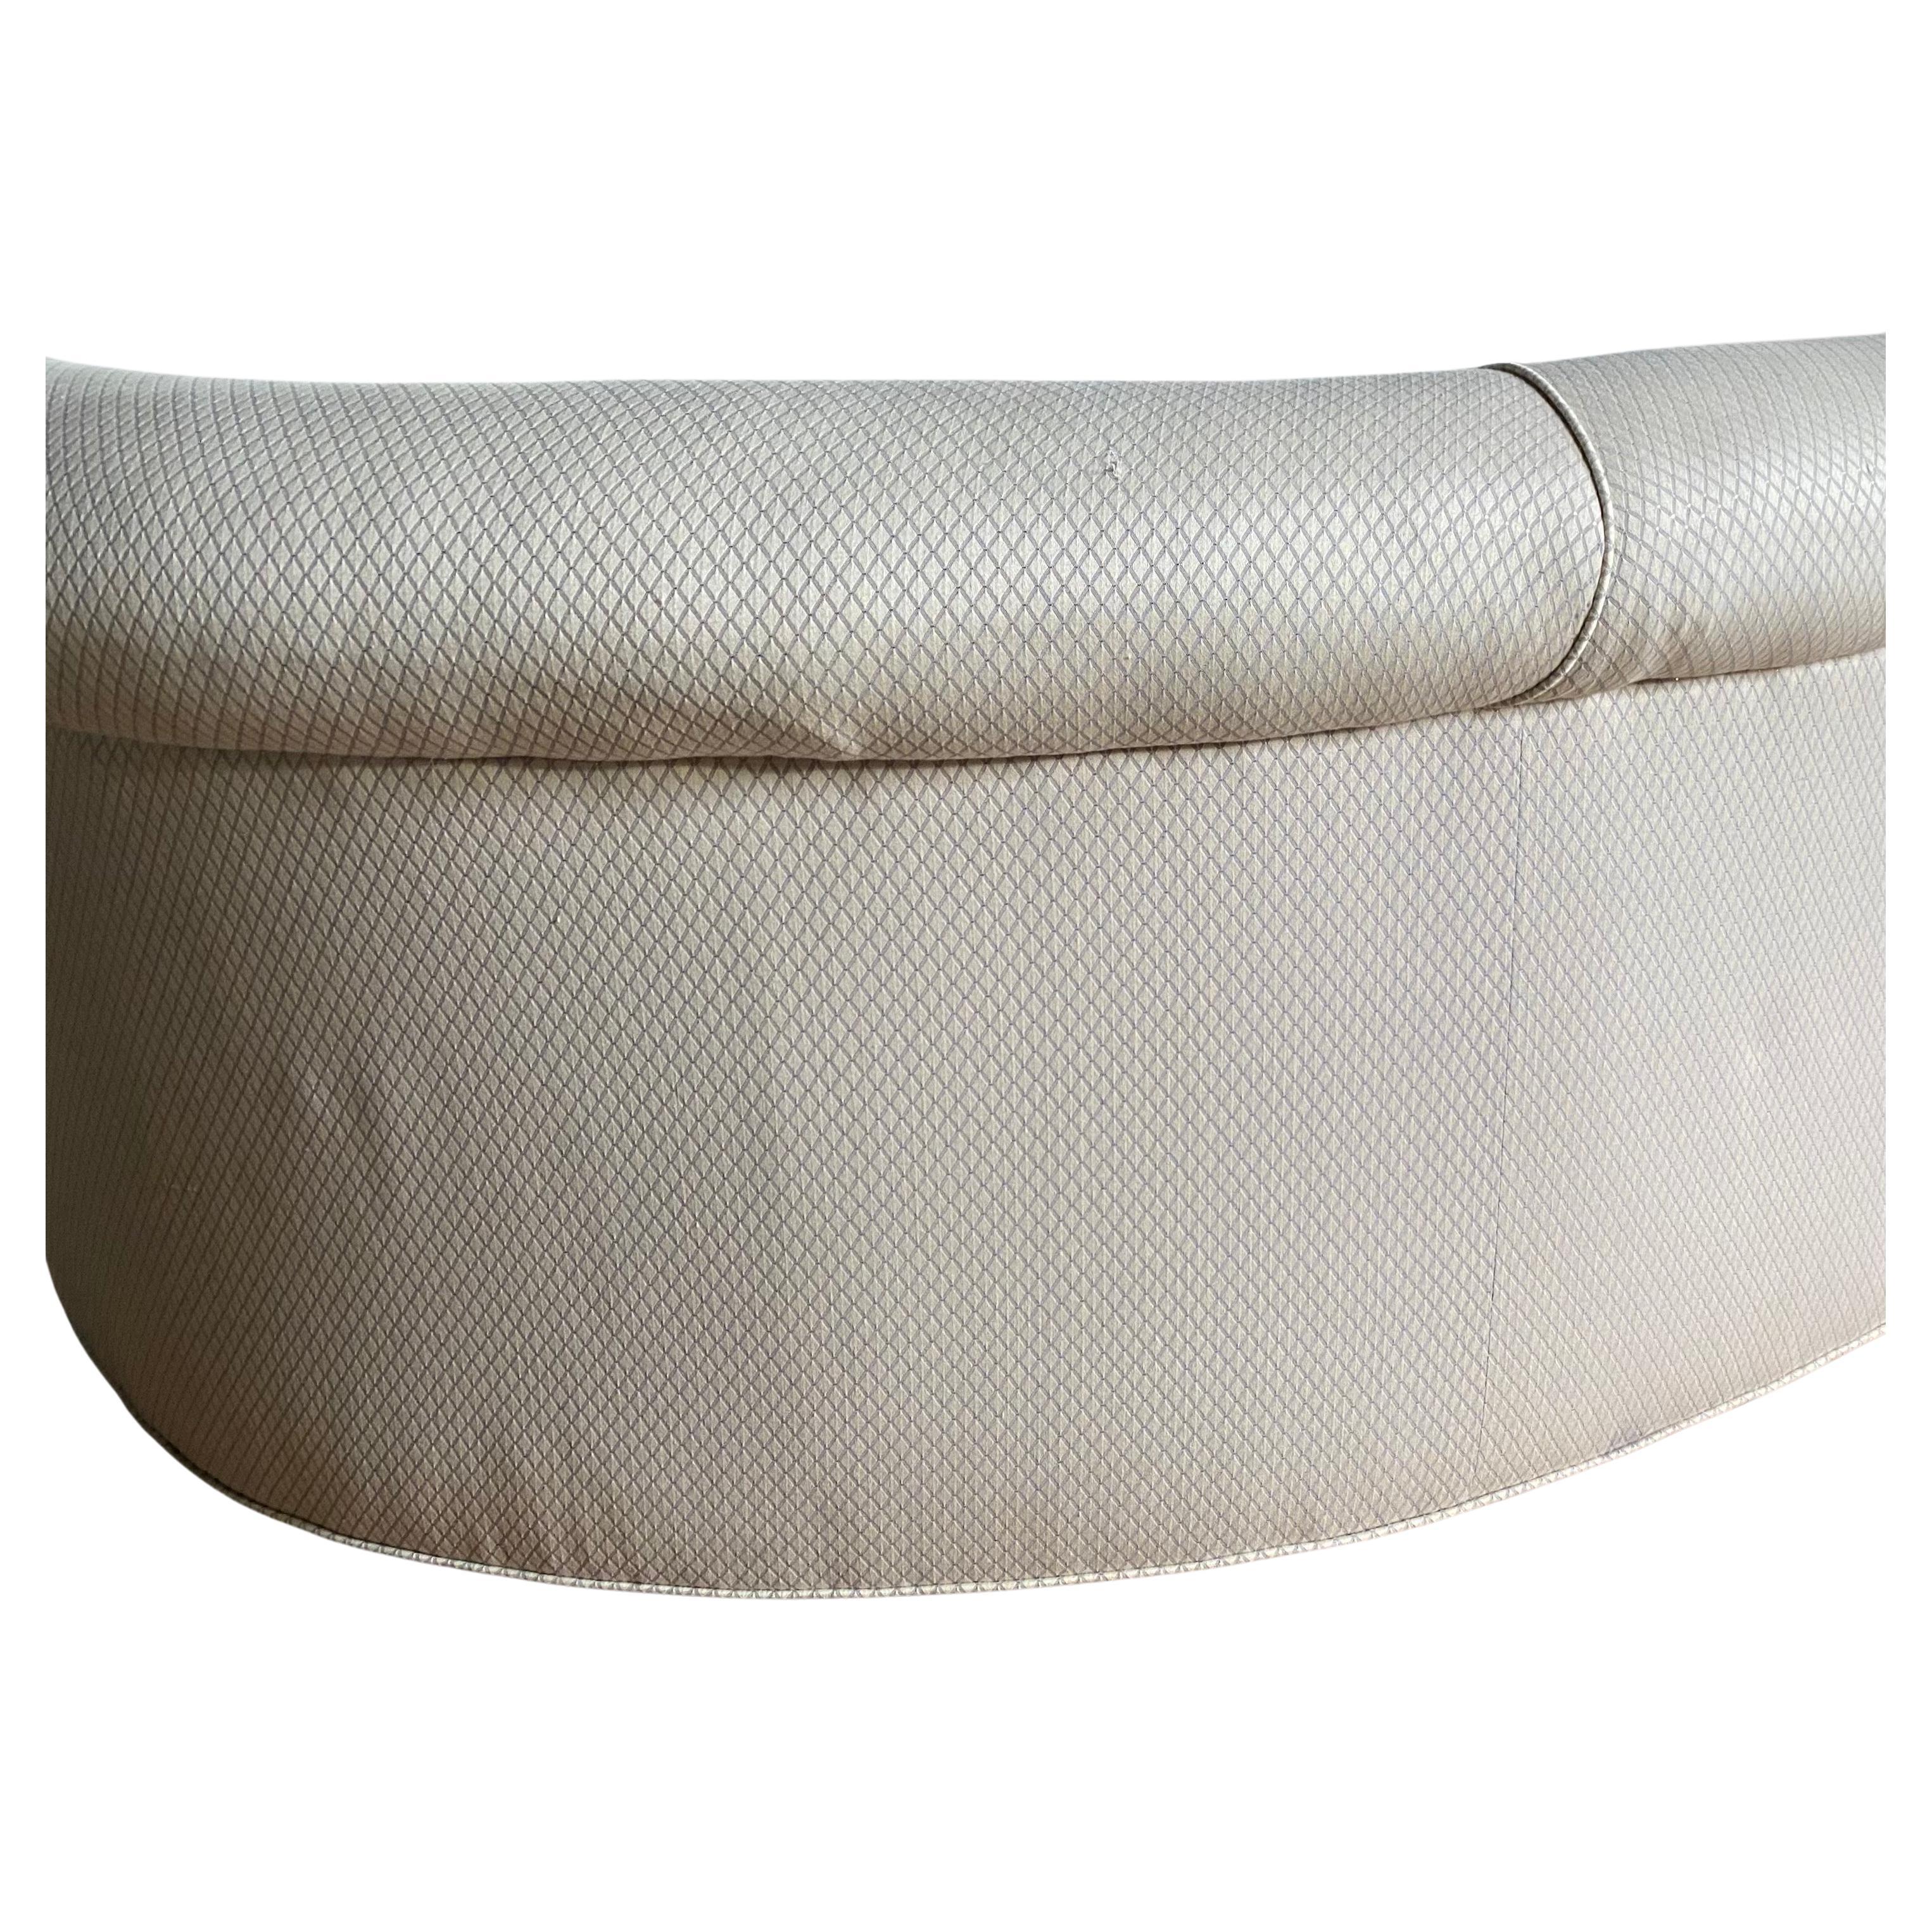 Mid-Century Modern Kidney Shaped Curved Serpentine Biomorphic Cloud Sofa For Sale 6